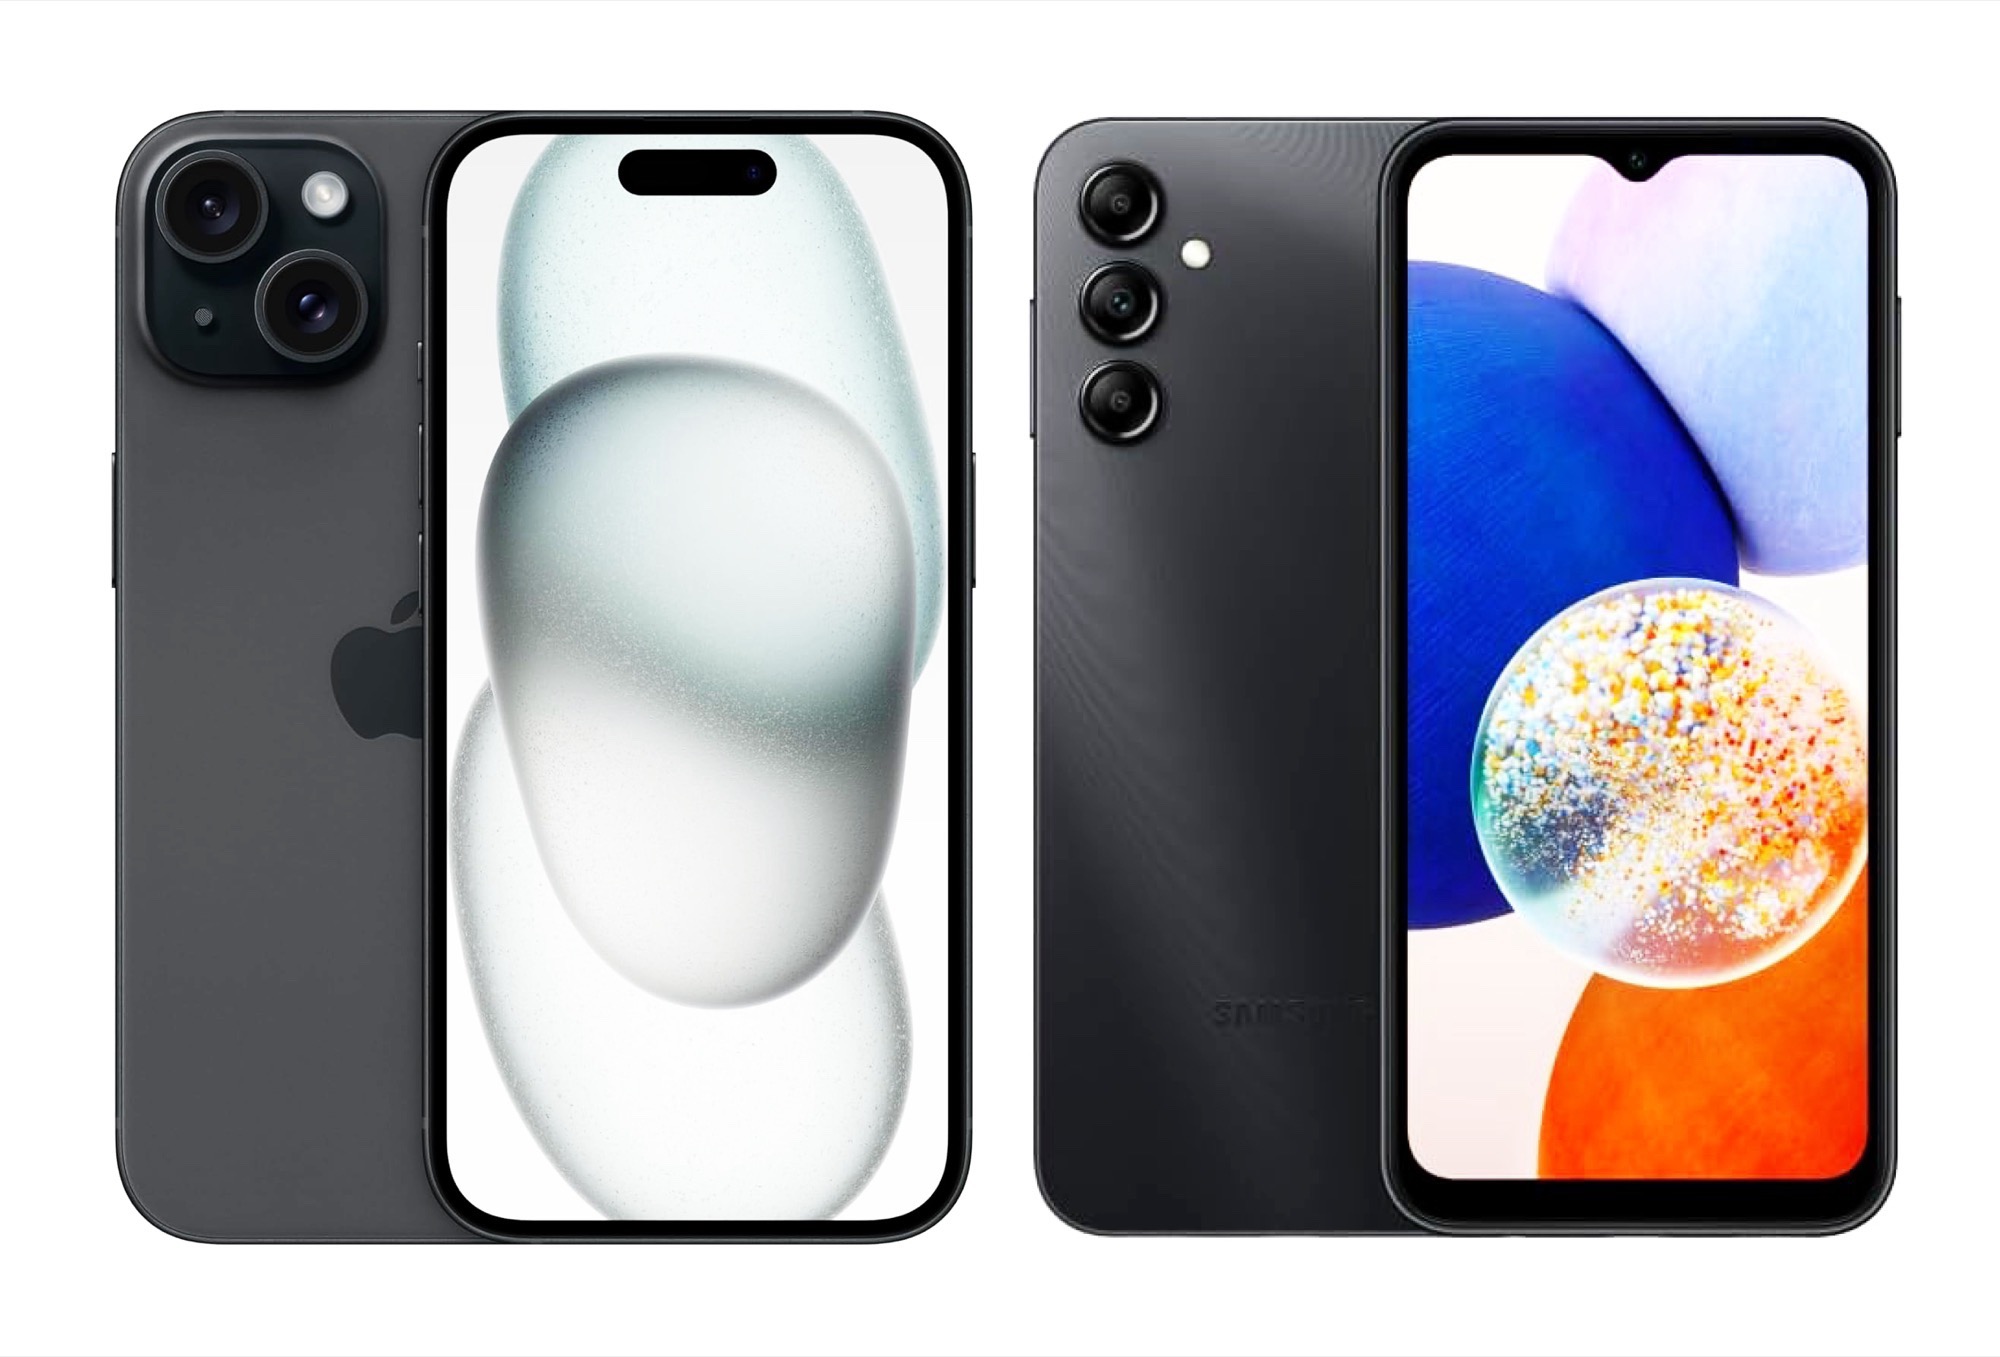 Apple iPhone and Samsung Galaxy A14 sweep the charts as consumers’ favorite smartphones in 2023